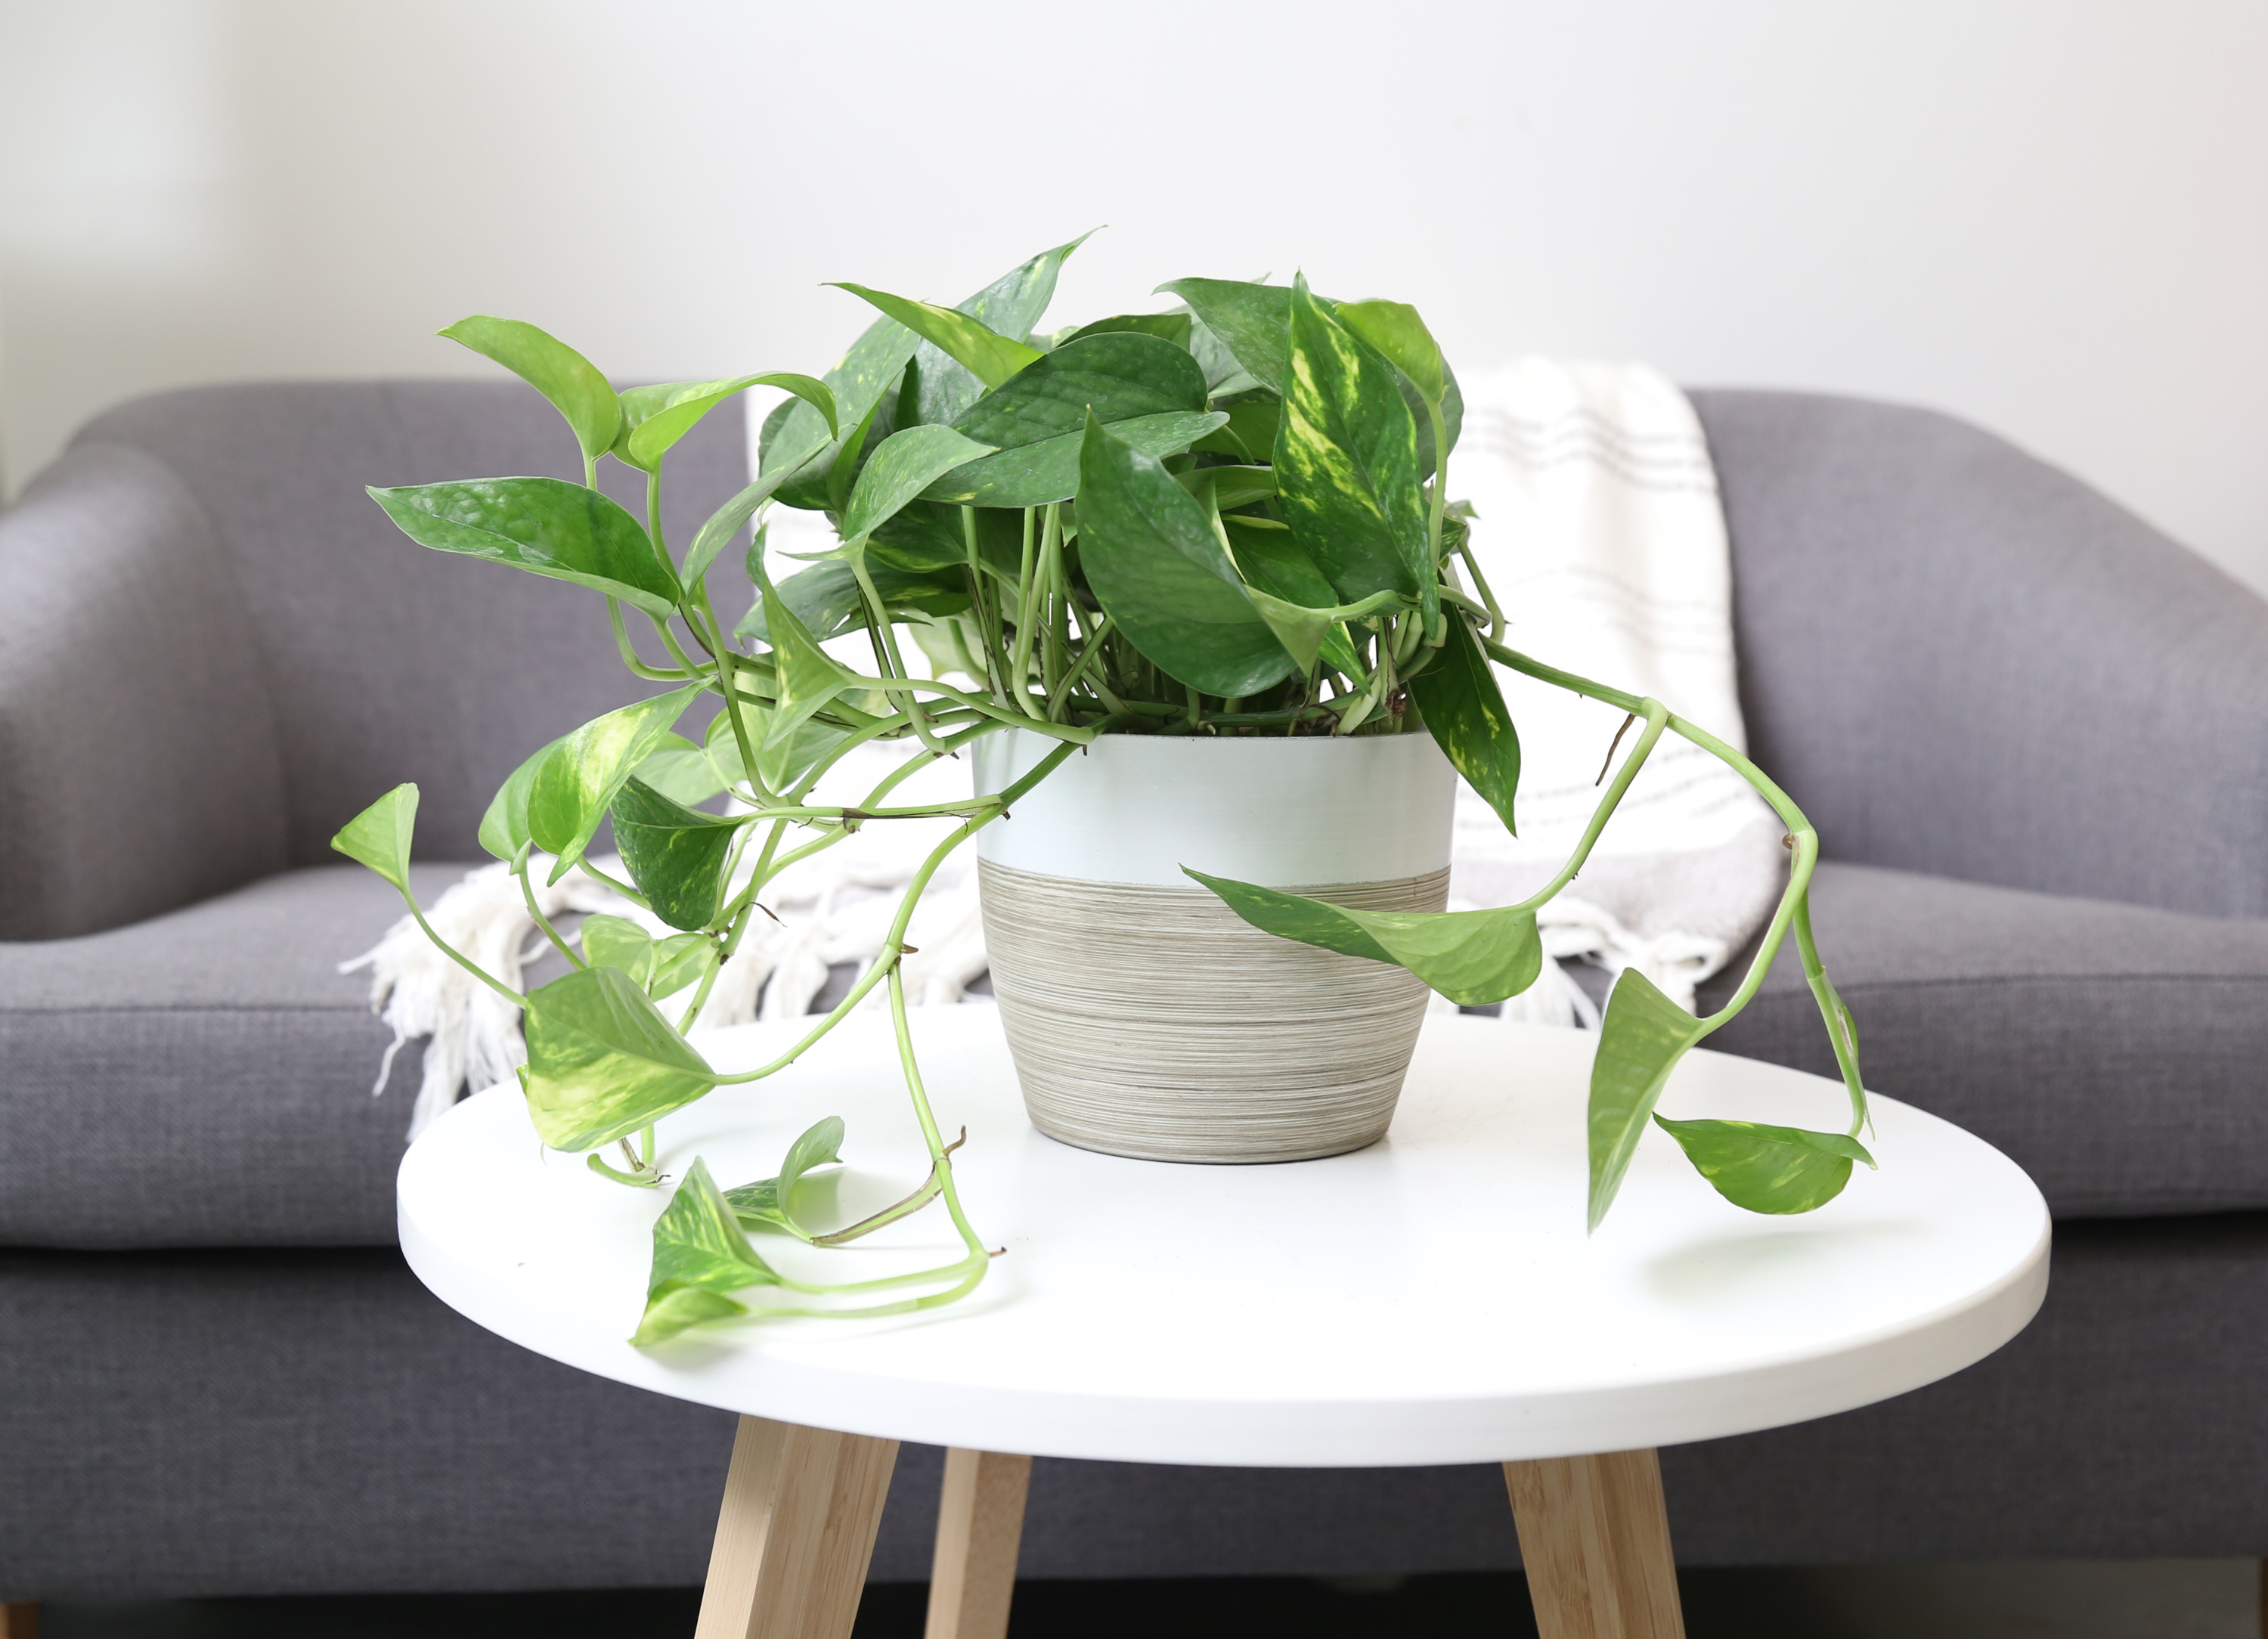 Costa Farms Live Indoor 10in. Tall Devil's Ivy Pothos; Medium, Indirect Light Plant in 6in. Grower Pot - image 4 of 11